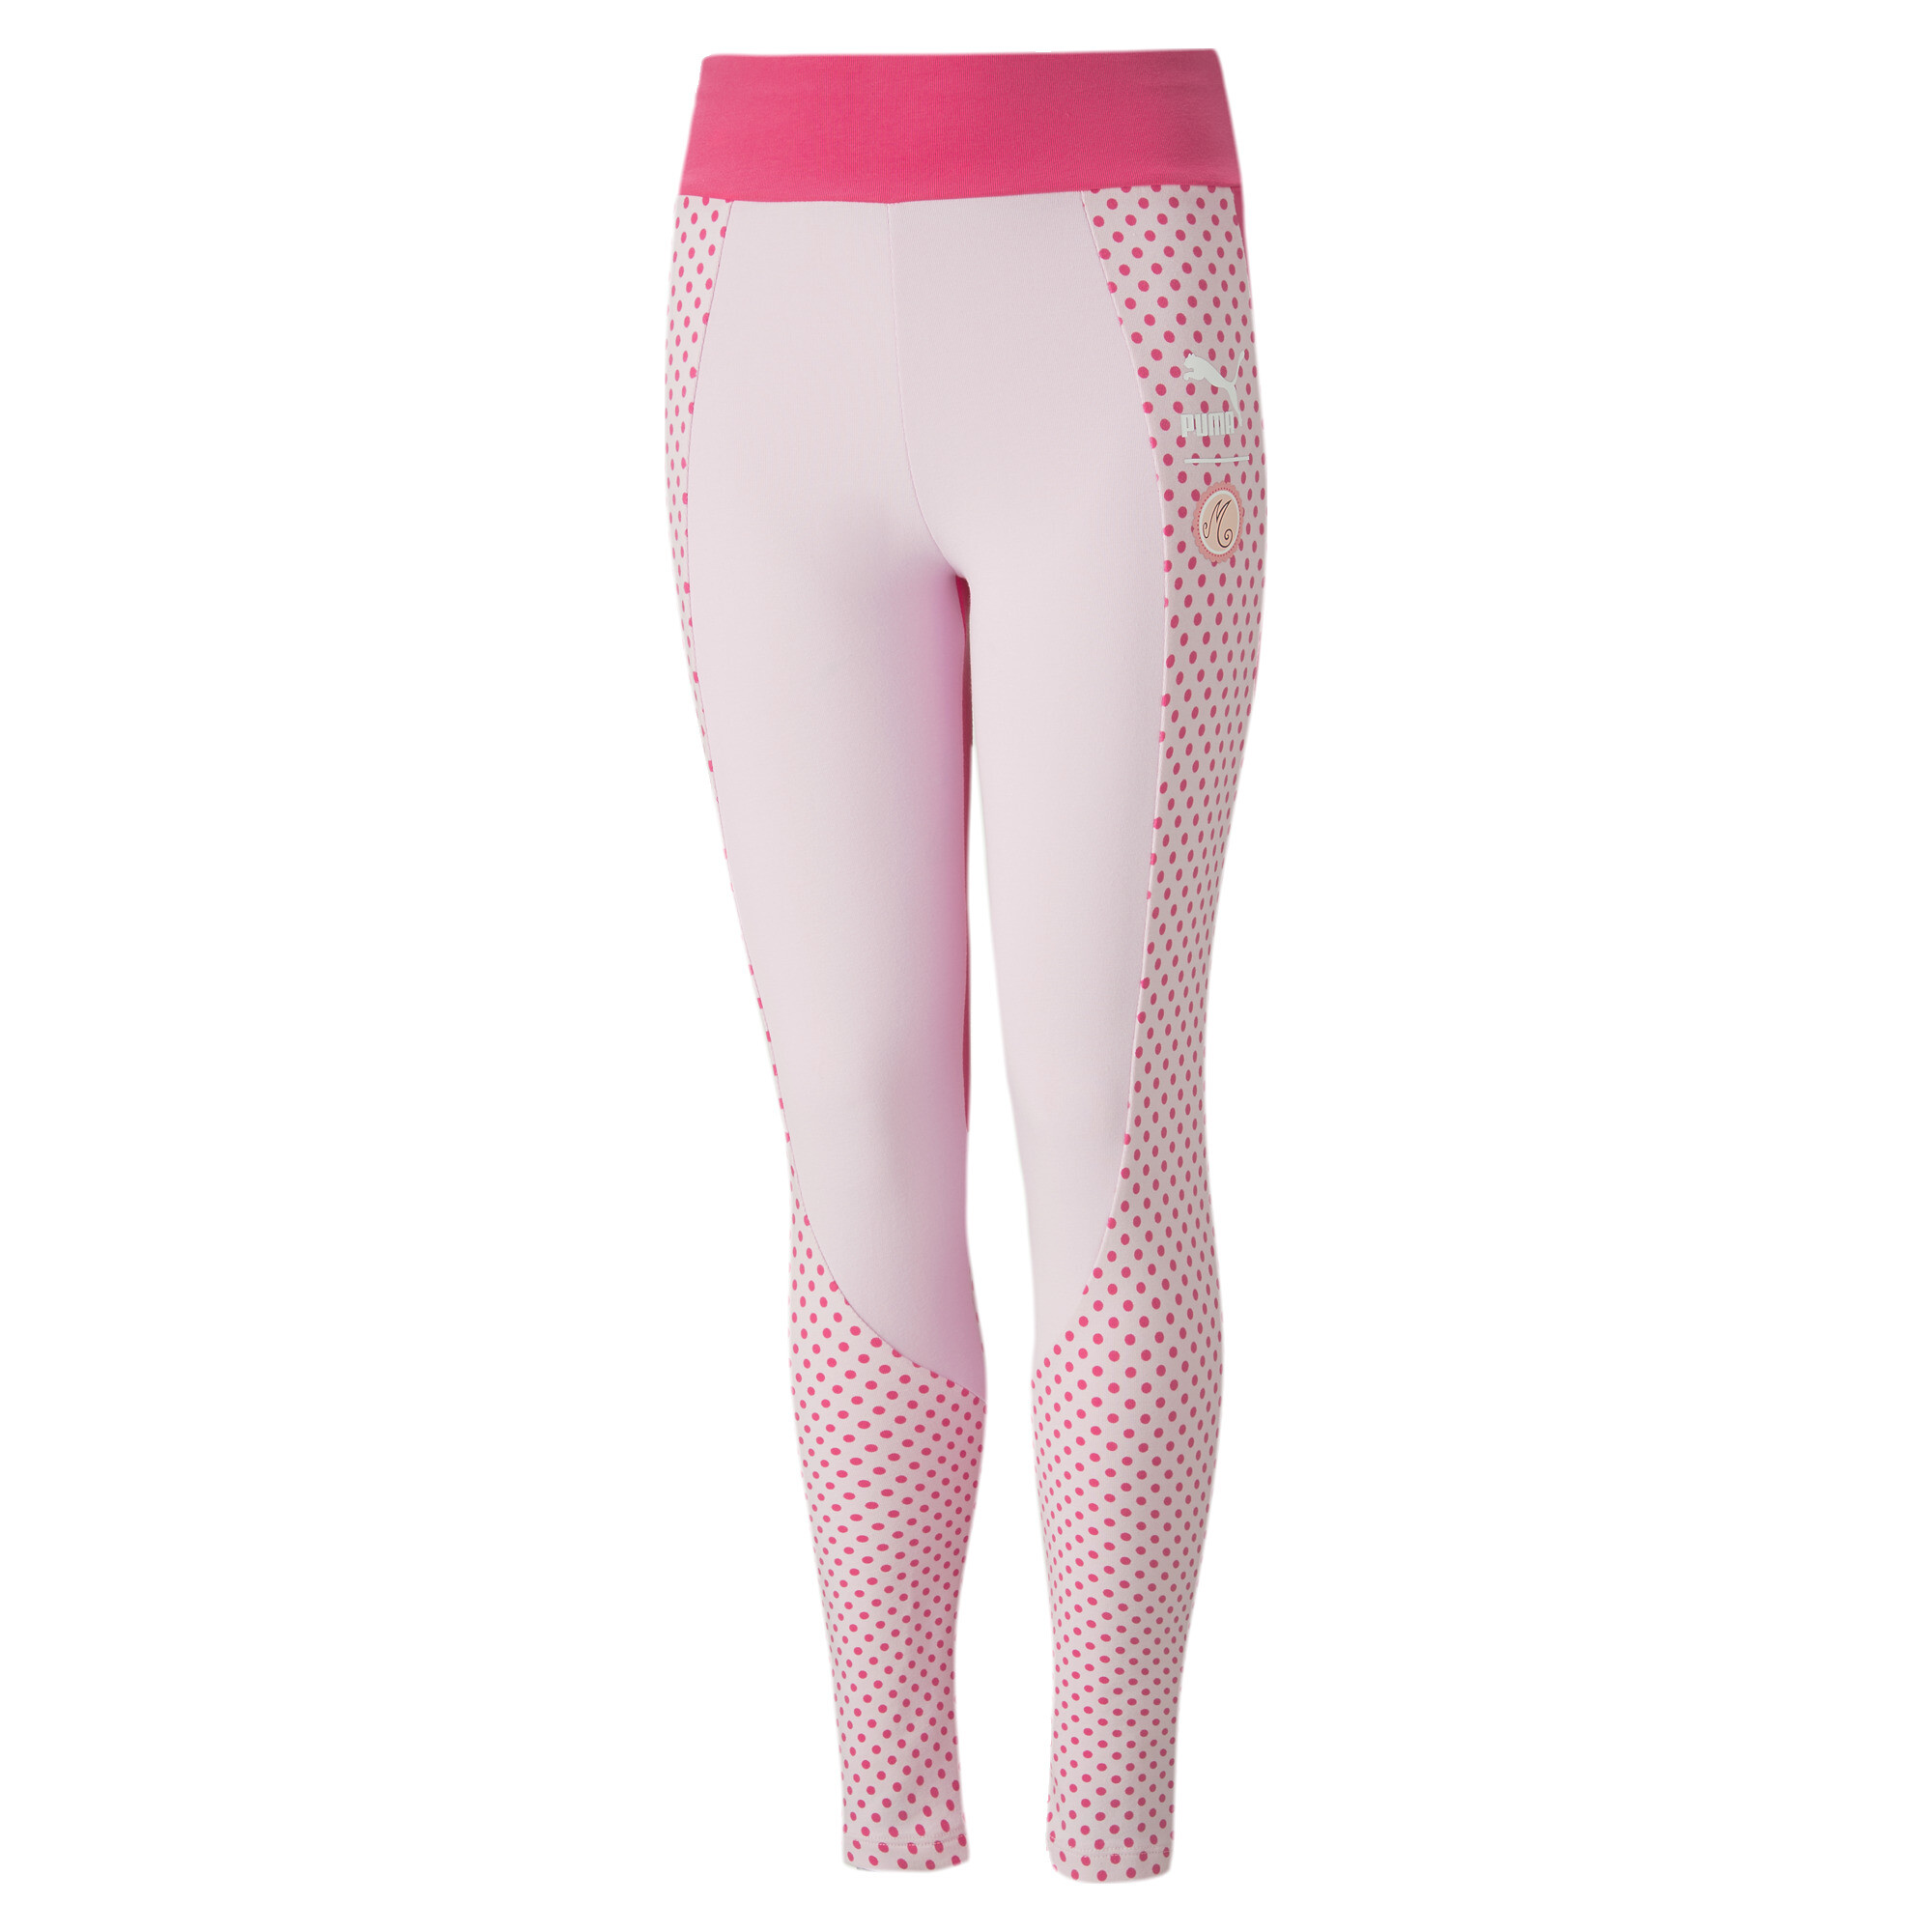 PUMA X MIRACULOUS Leggings In Pink, Size 7-8 Youth